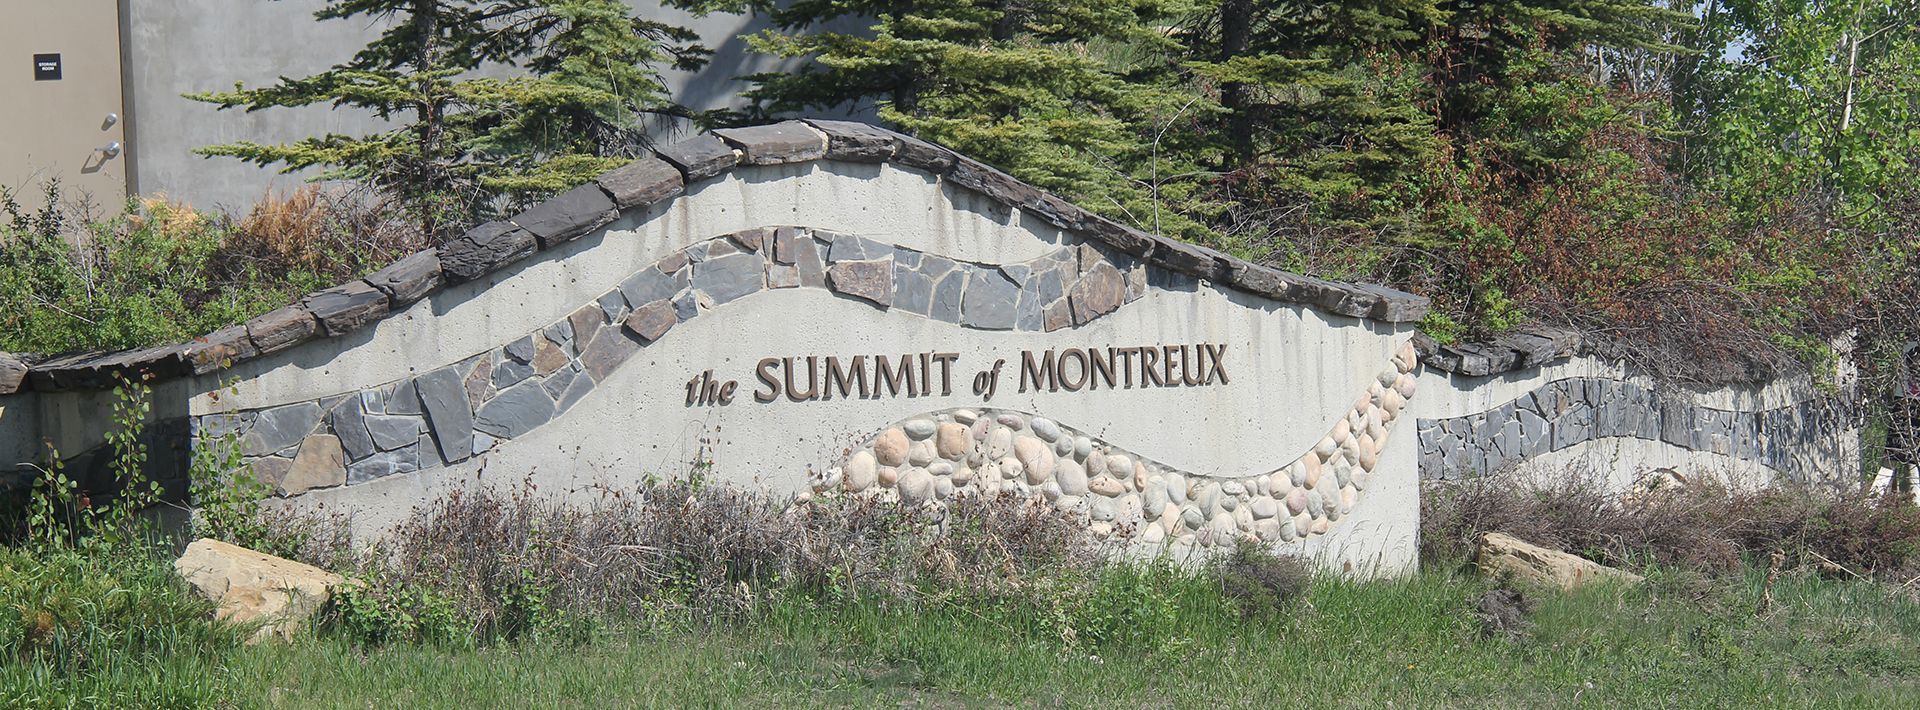 A sign that says summit of montreux on it